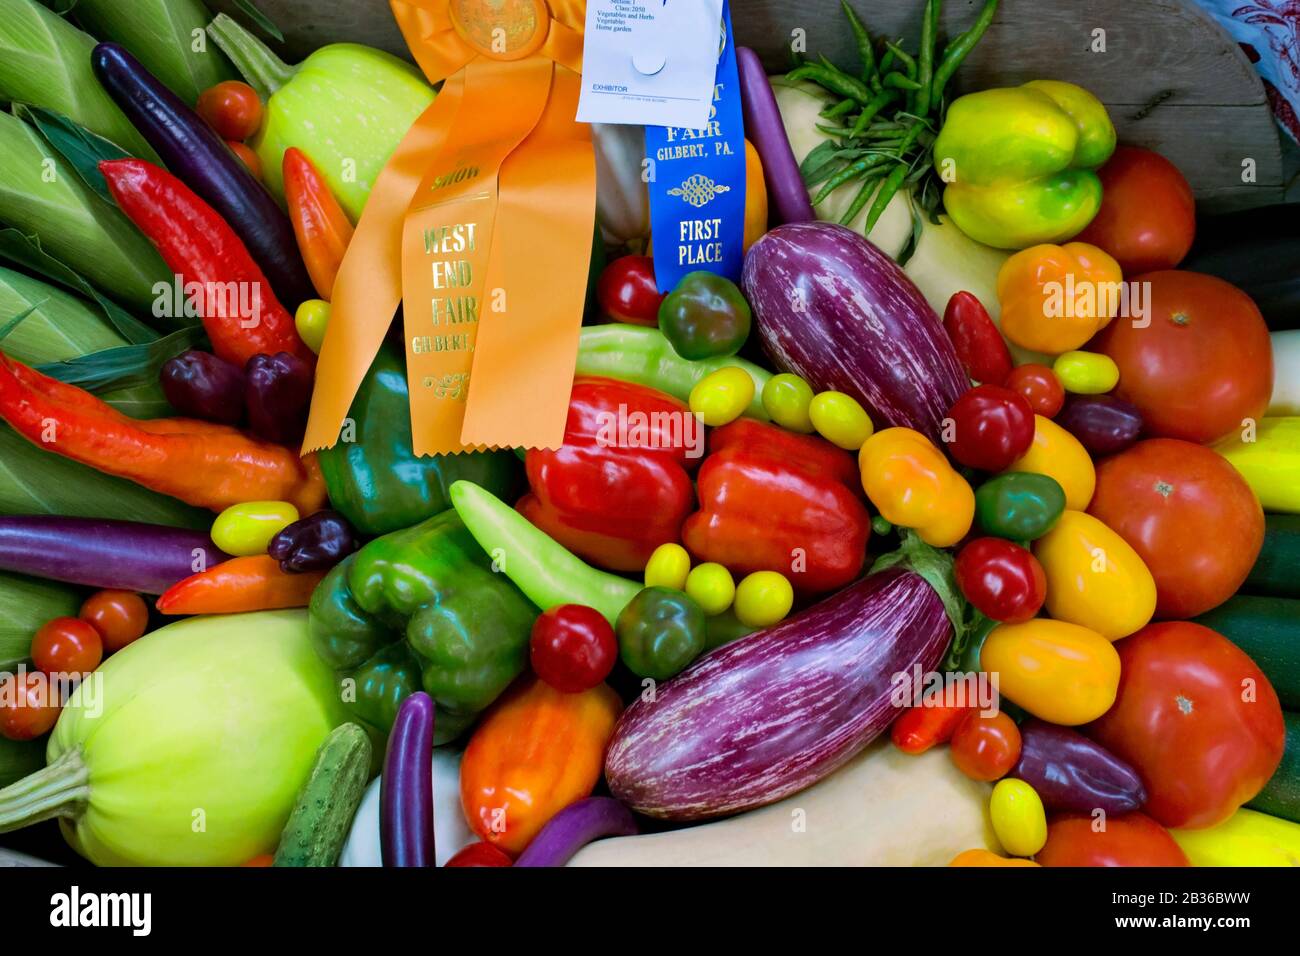 A variety of vegetables wins Best in Show at the West End Fair in Gilbert, Pennsylvania Stock Photo